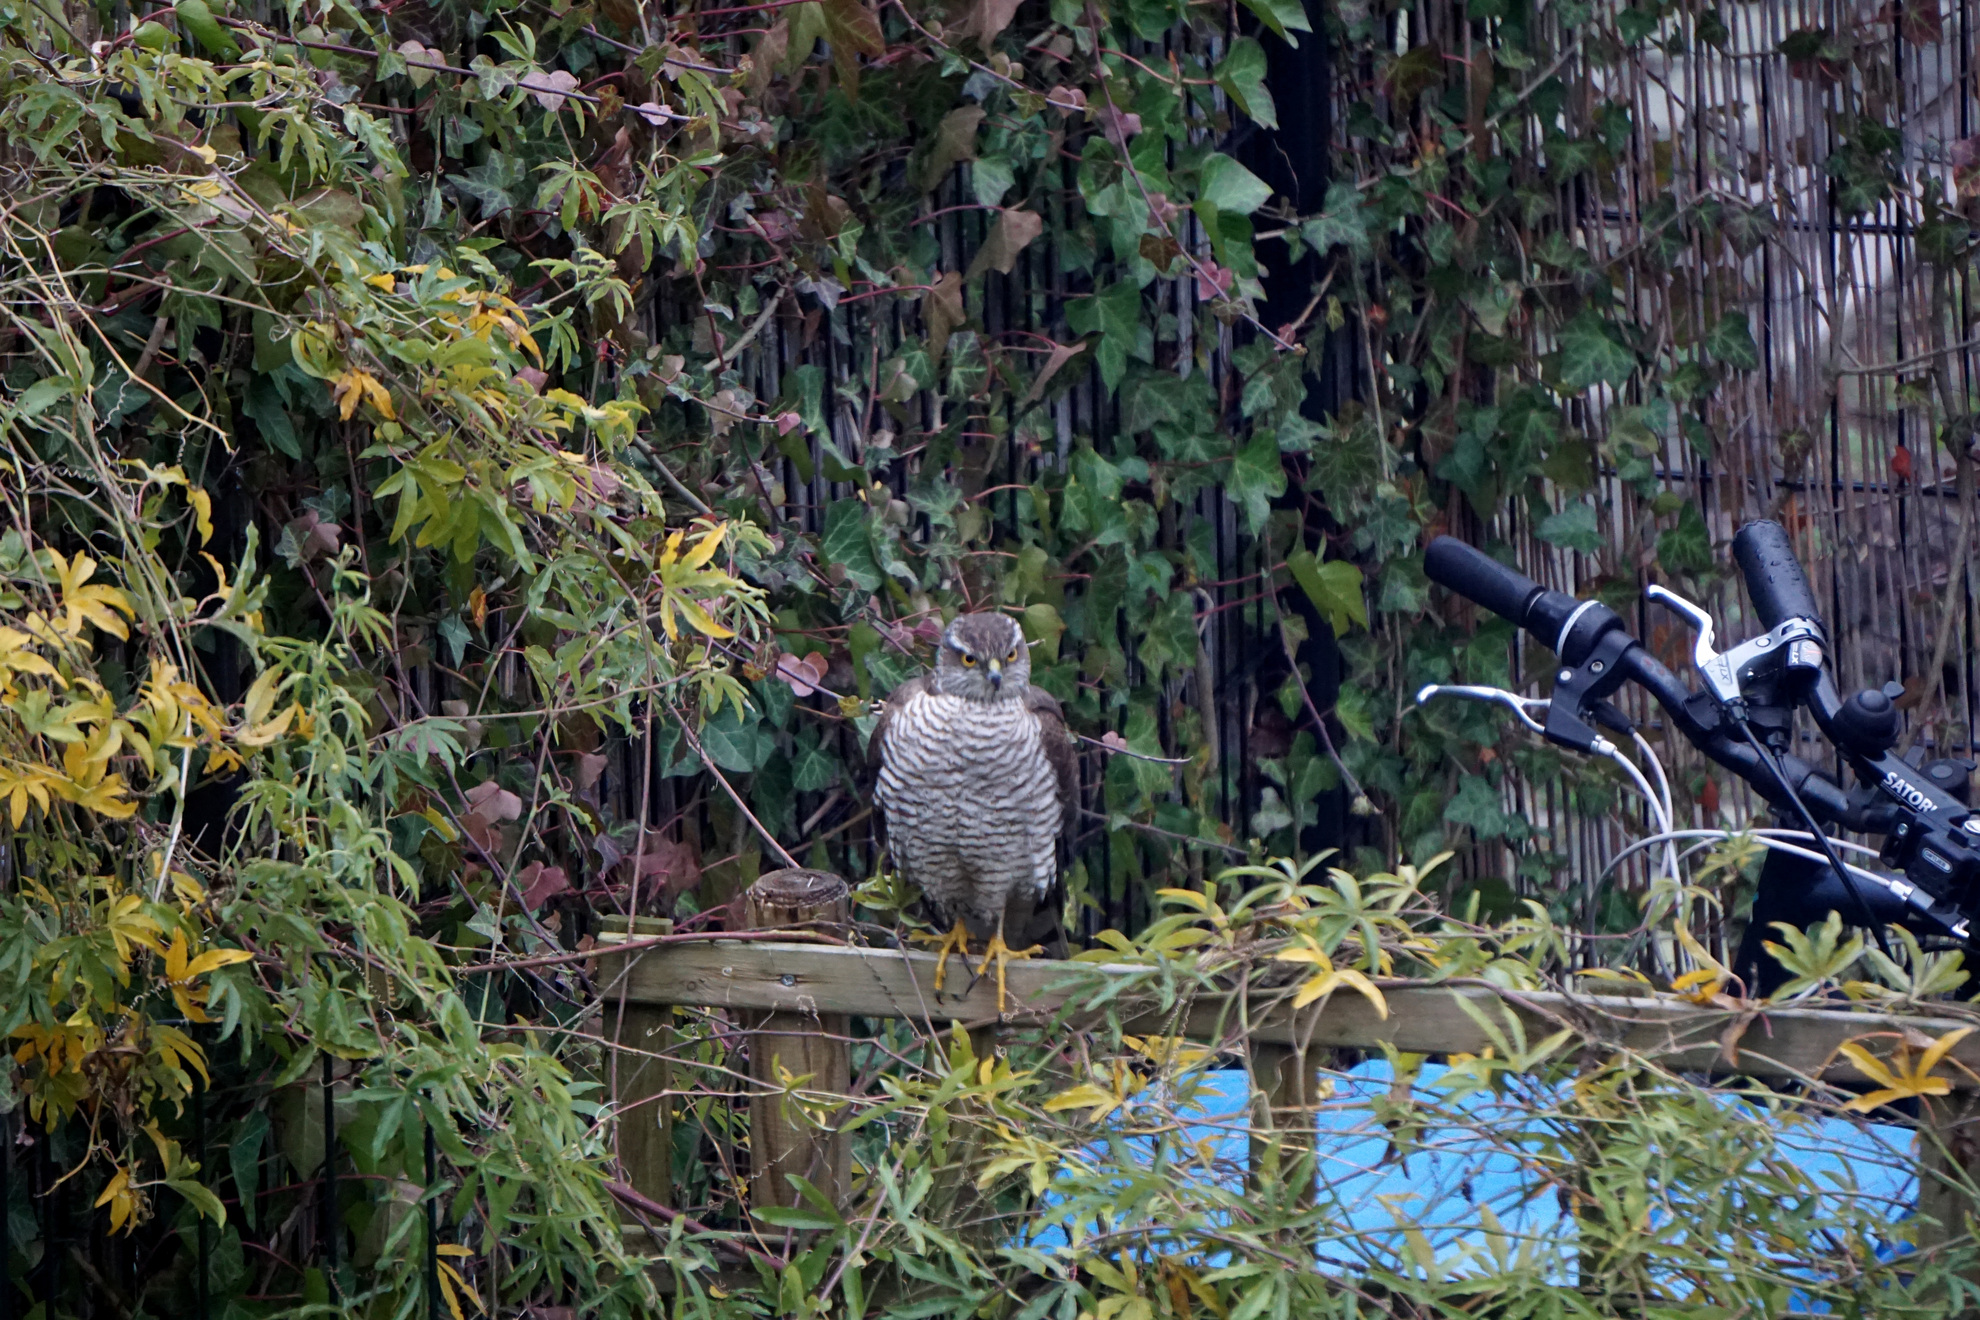 Sparrowhawk on a wooden structure